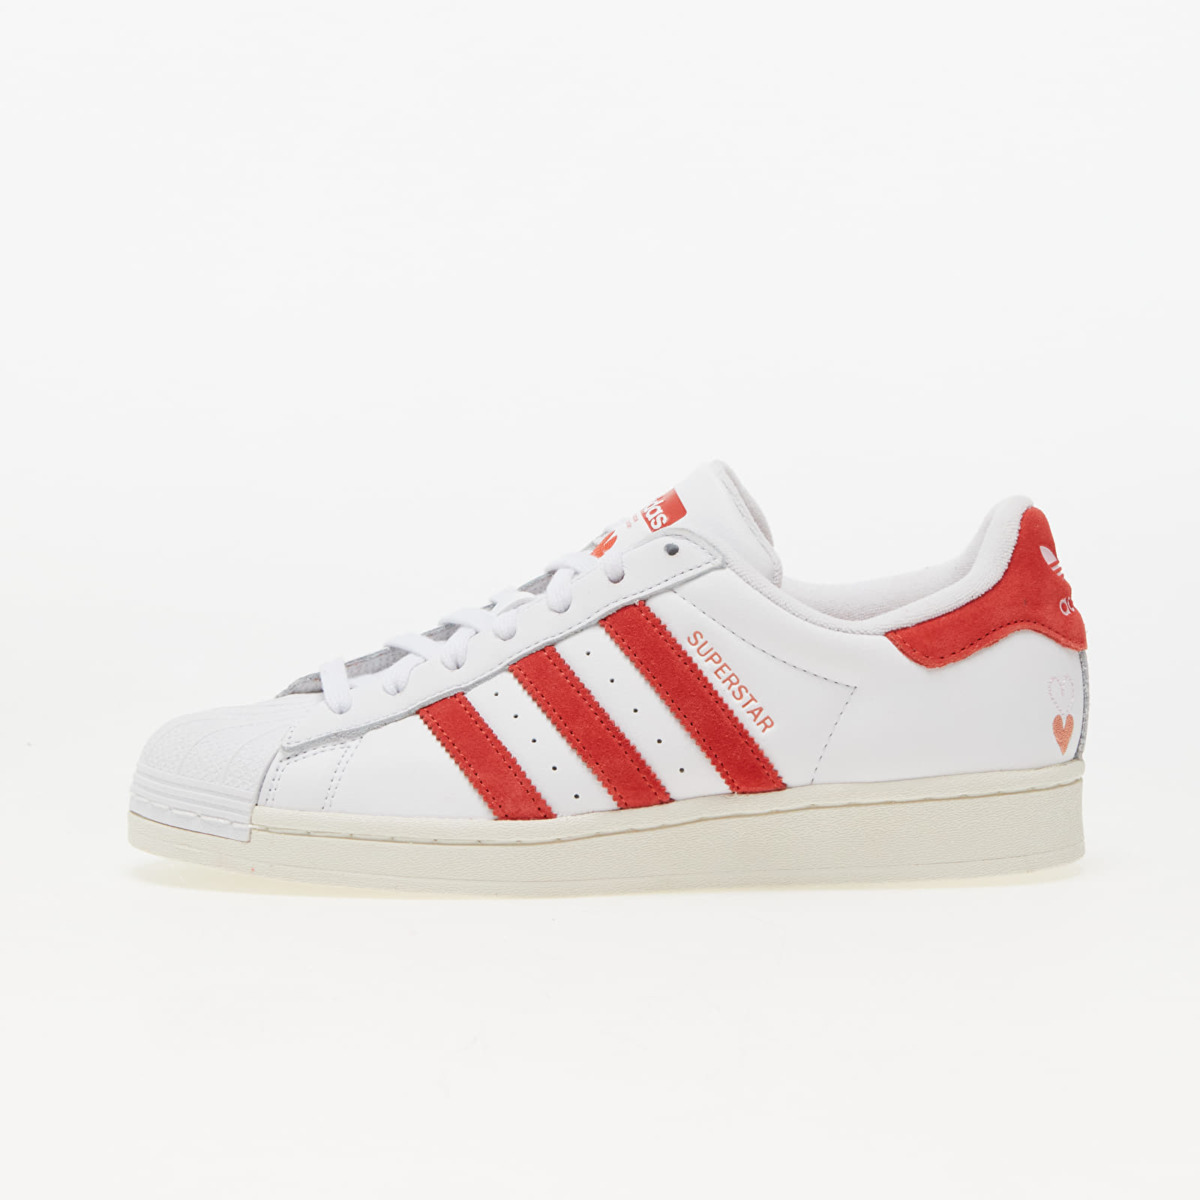 Adidas - Lady Superstars in Red by Footshop GOOFASH